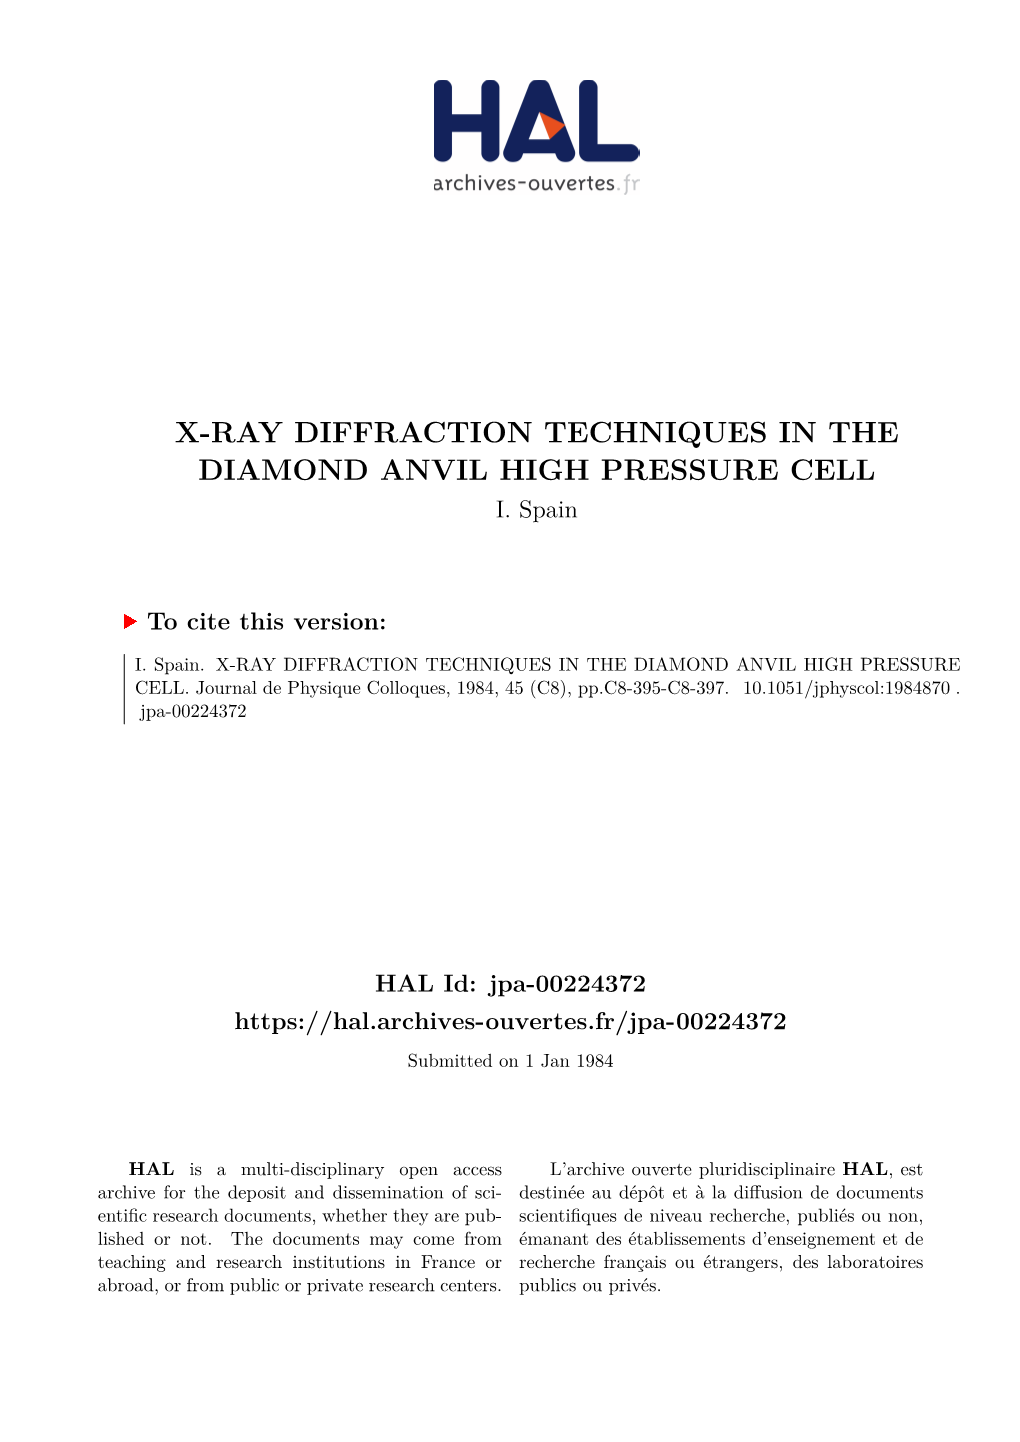 X-Ray Diffraction Techniques in the Diamond Anvil High Pressure Cell I